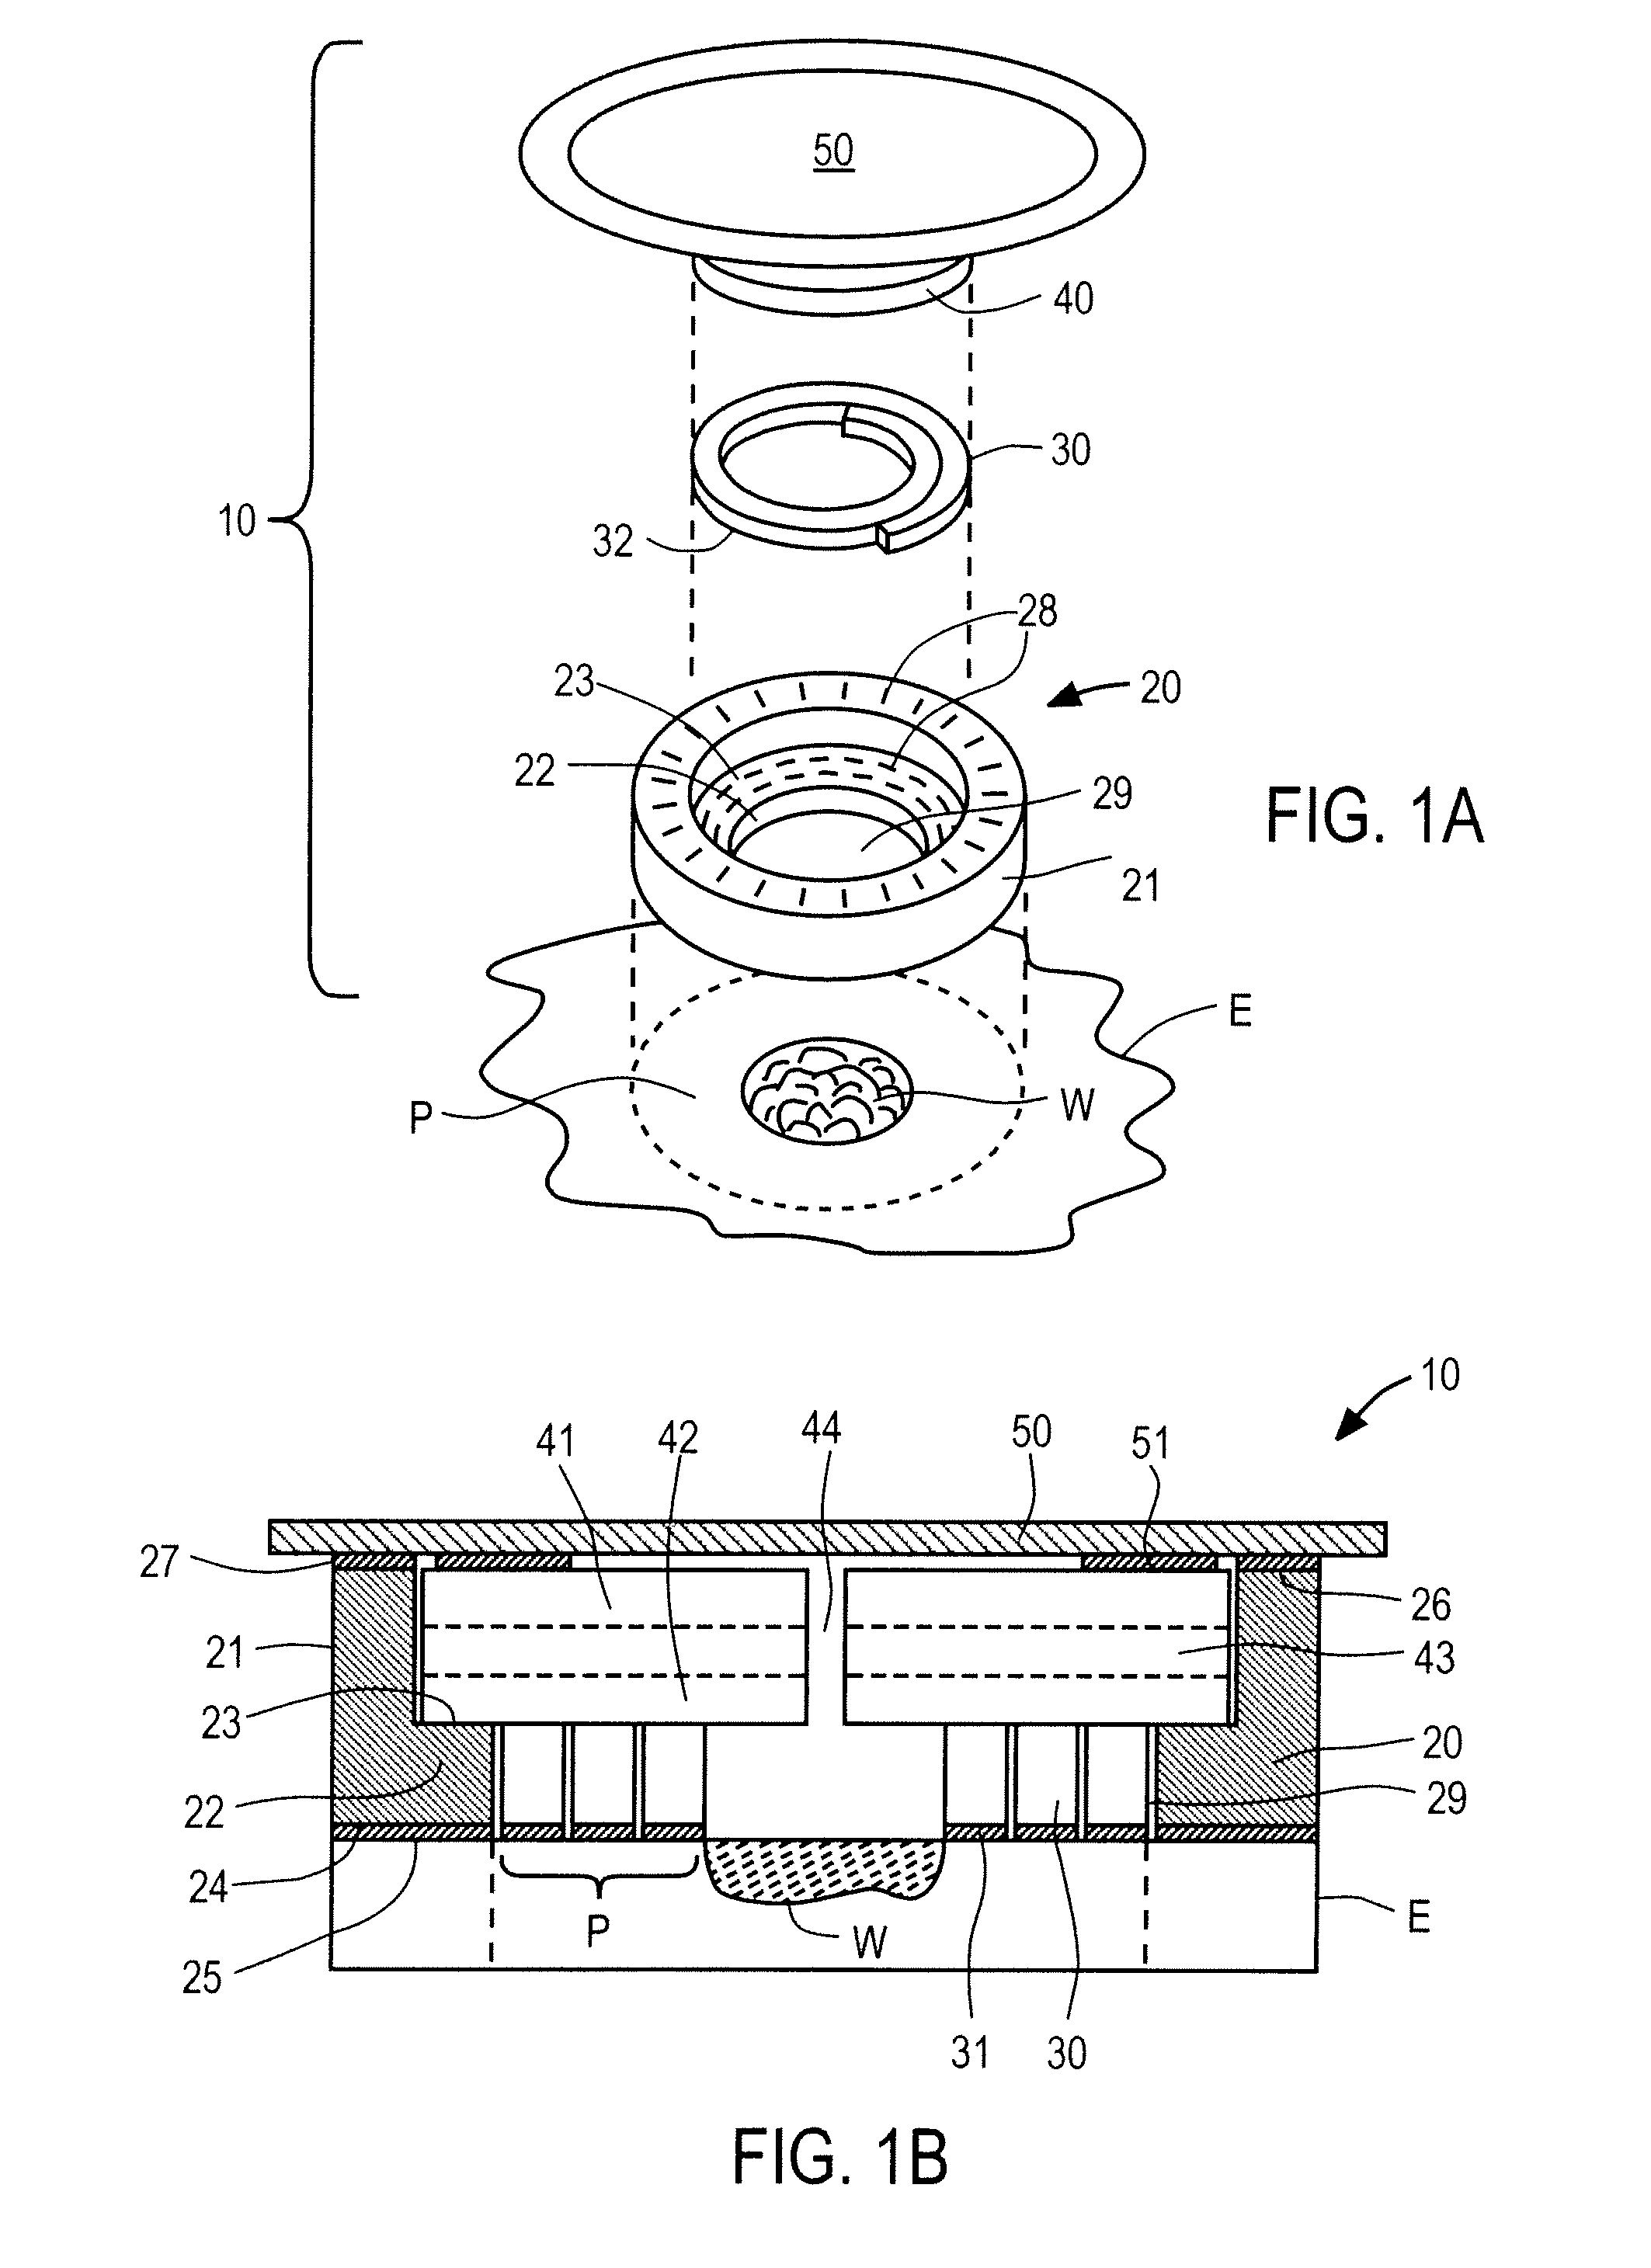 Secondary Wound Dressings for Securing Primary Dressings and Managing Fluid from Wounds, and Methods of Using Same